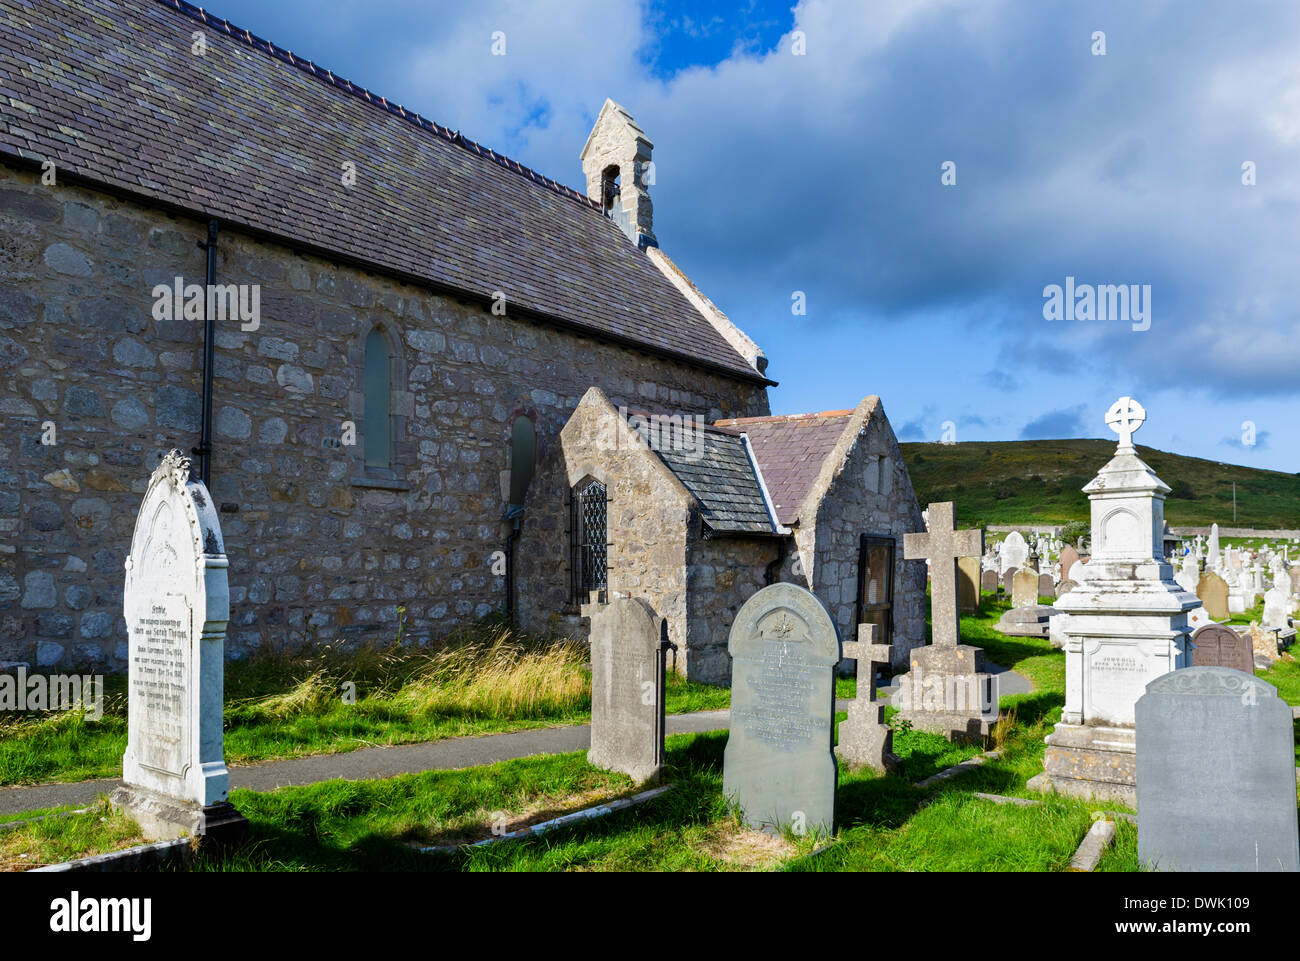 Entrance to St Tudno's Church on The Great Orme, Llandudno, Conwy, North Wales, UK Stock Photo